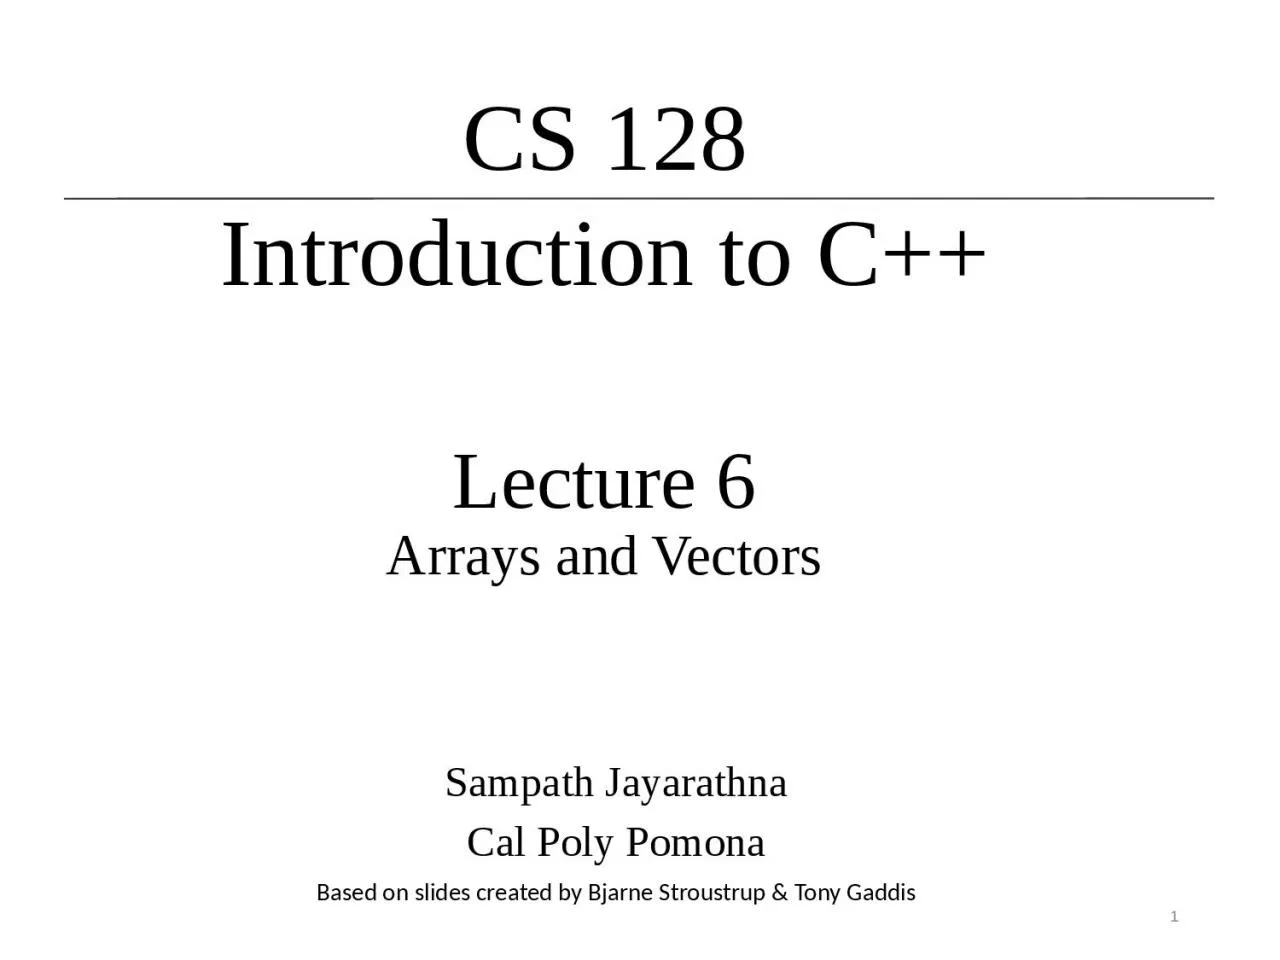 Lecture 6 Arrays and Vectors